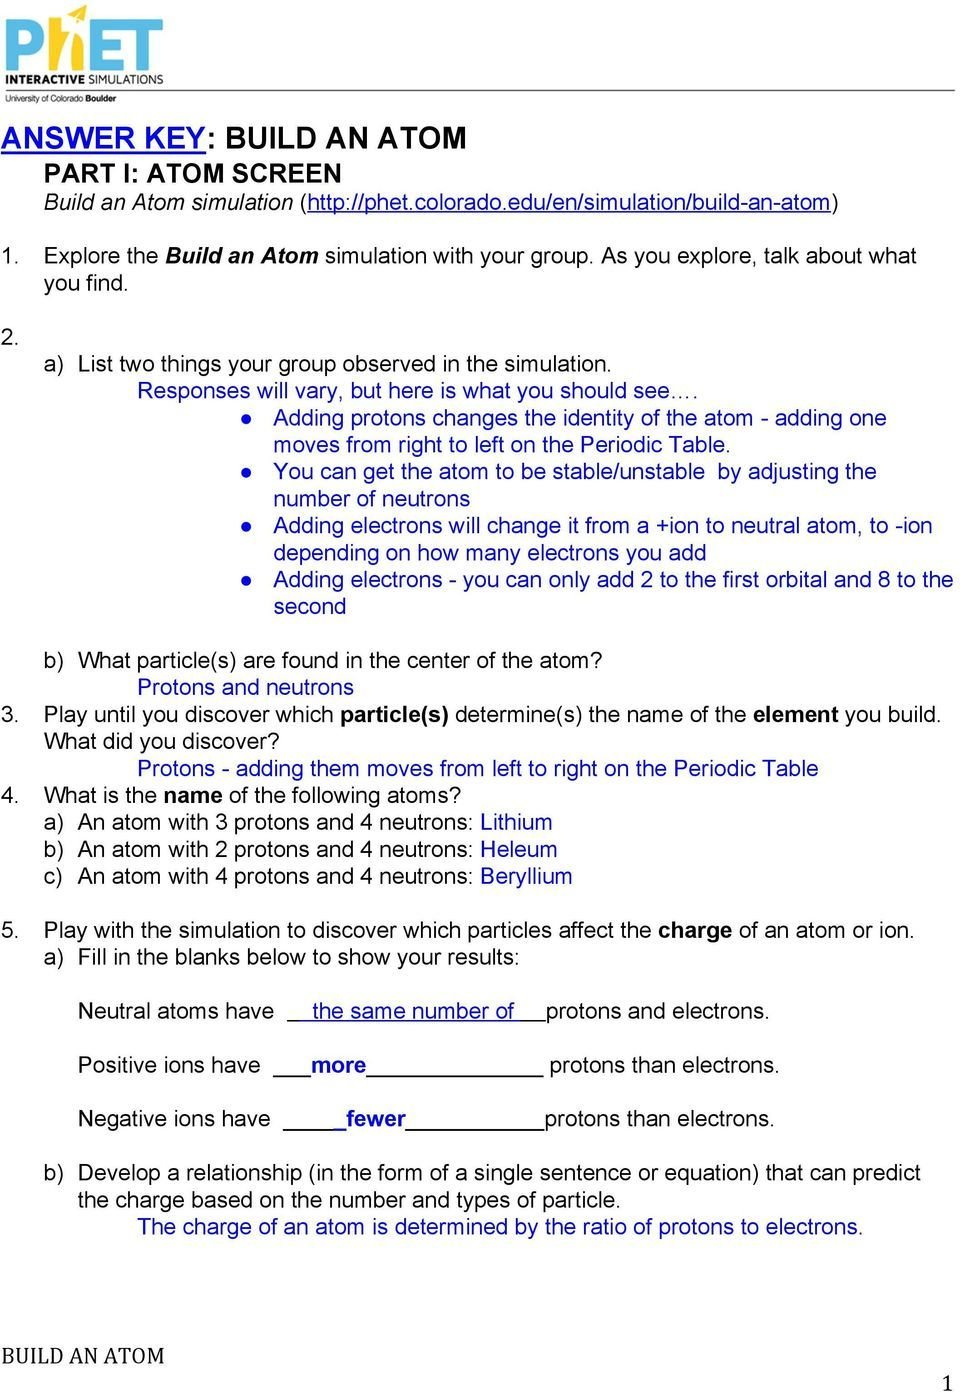 Phet Isotopes And Atomic Mass Worksheet Answers  Briefencounters Intended For Phet Isotopes And Atomic Mass Worksheet Answer Key